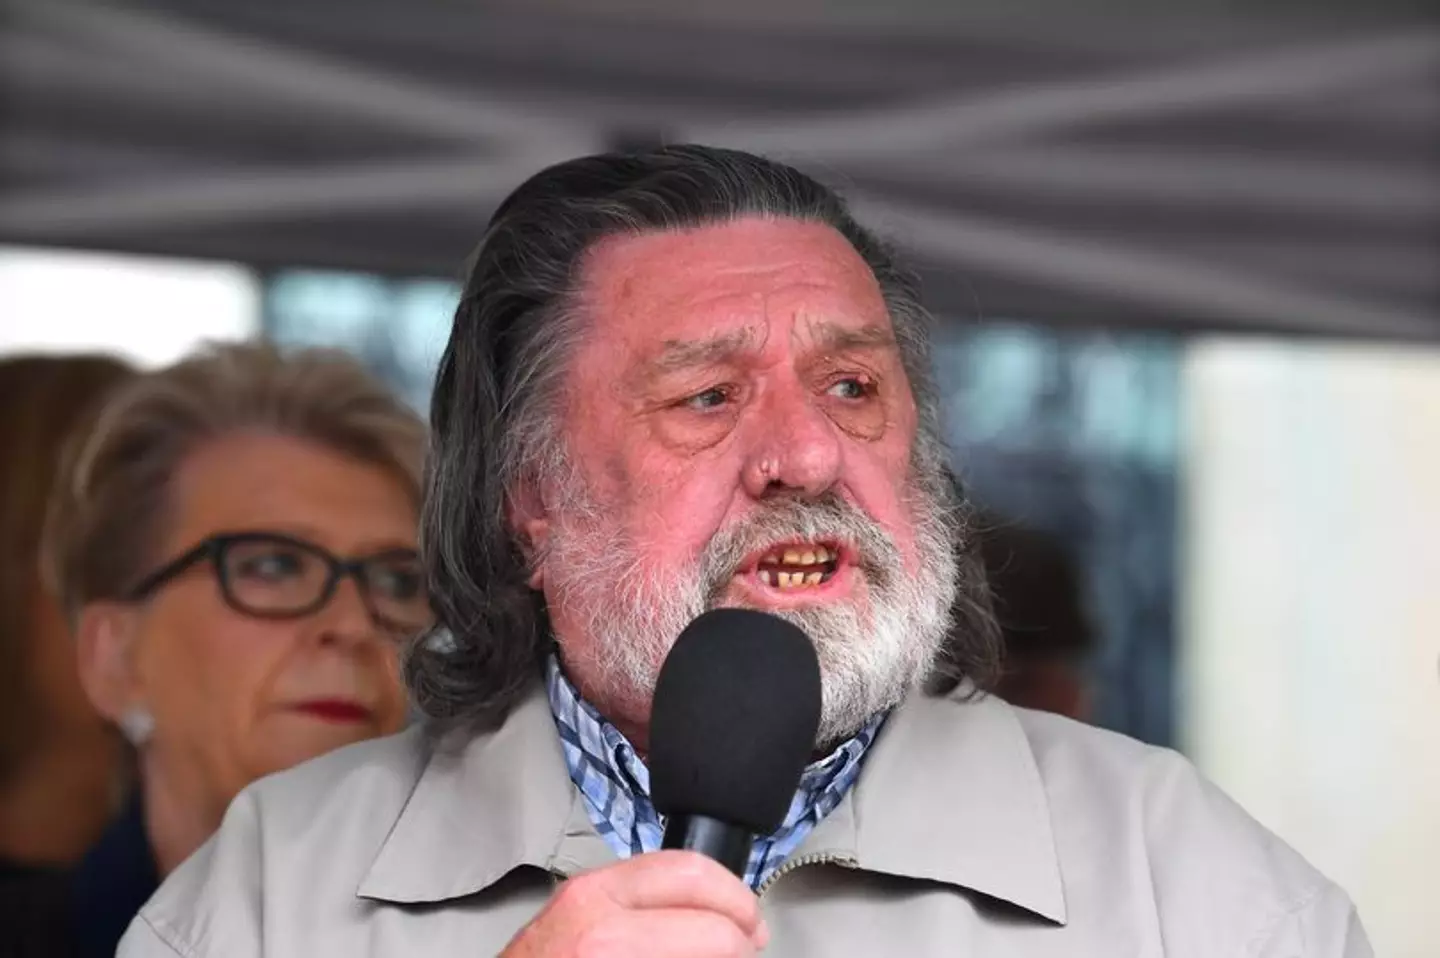 Ricky Tomlinson has apparently made a fair bit of money from flogging Cameo videos.